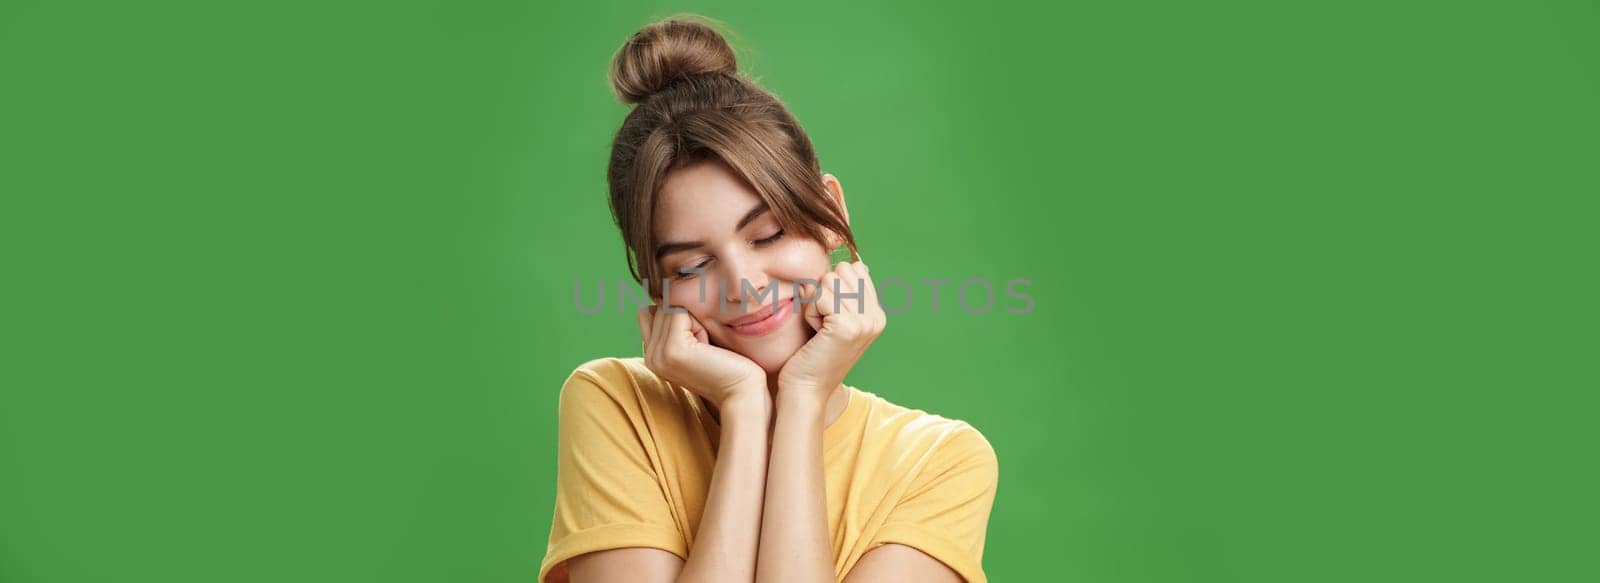 Tender sensual timid european girl in yellow t-shirt leaning head on shoulder touching cheeks with hands closing eyes and smiling with soft grin feeling nostalgic and romantic over green background. Lifestyle.